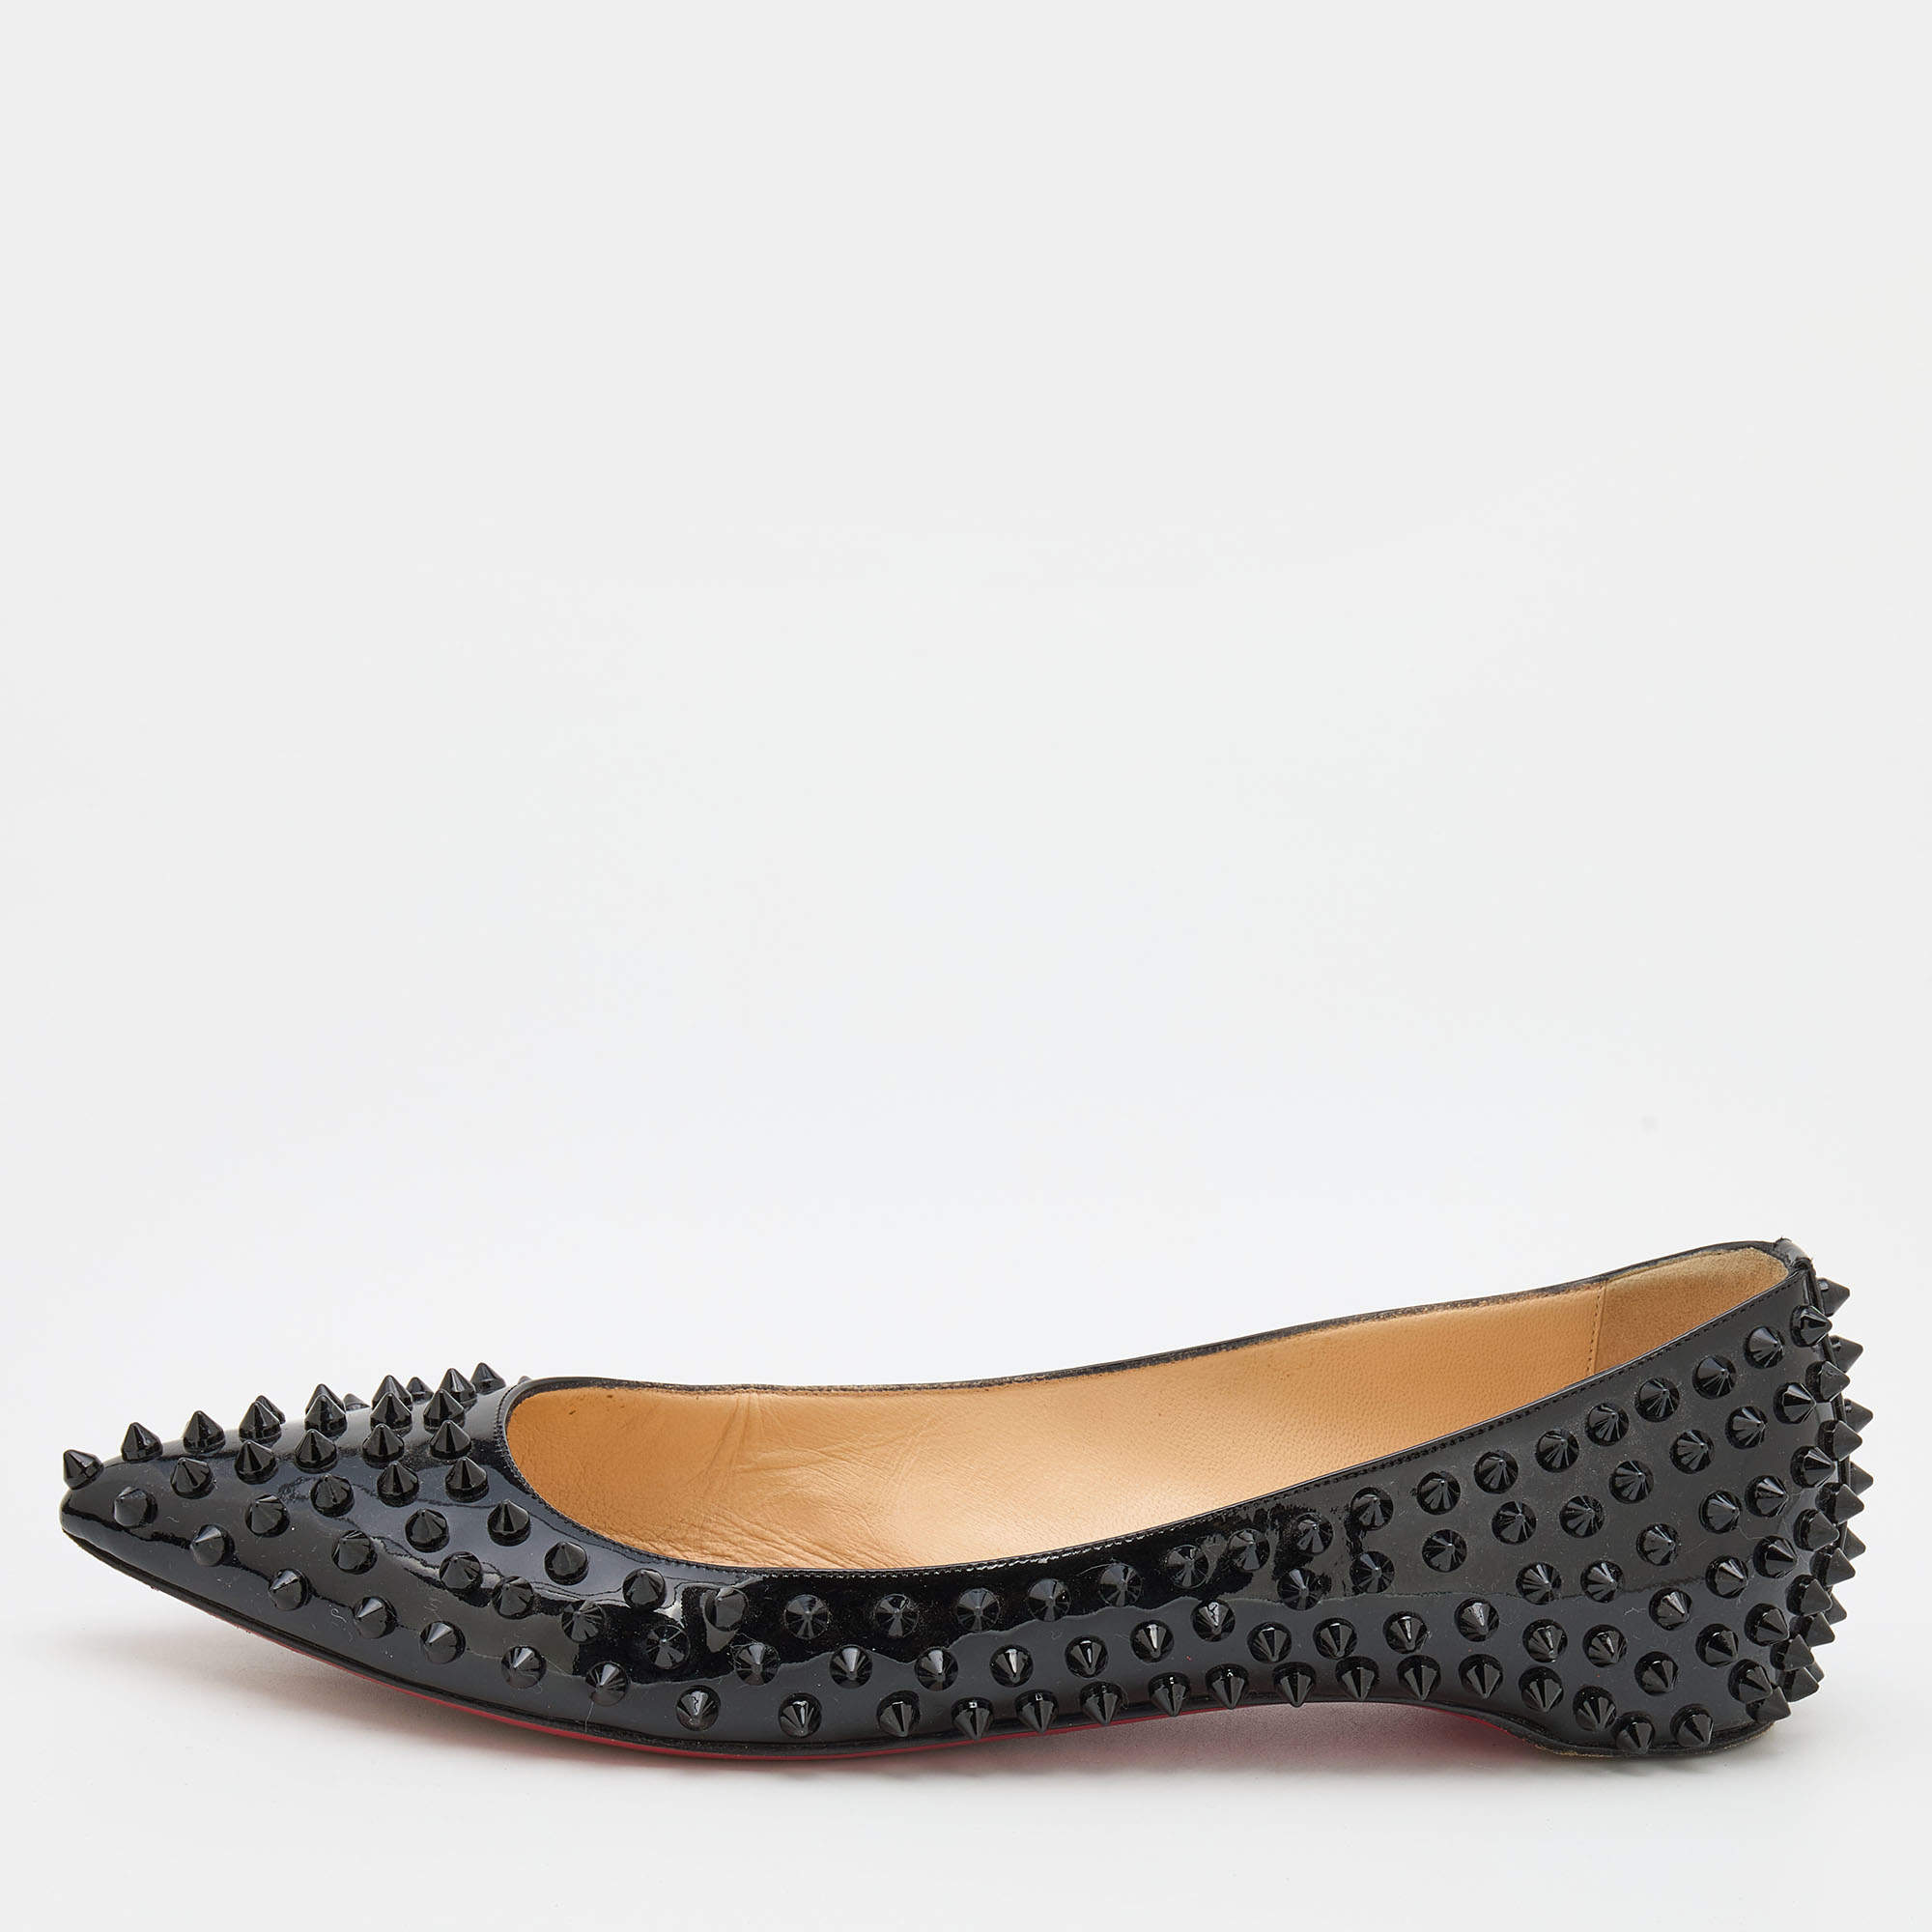 Christian Louboutin Black Patent Leather Spikes Pointed Toe Ballet Flats 39.5 Christian Louboutin | TLC